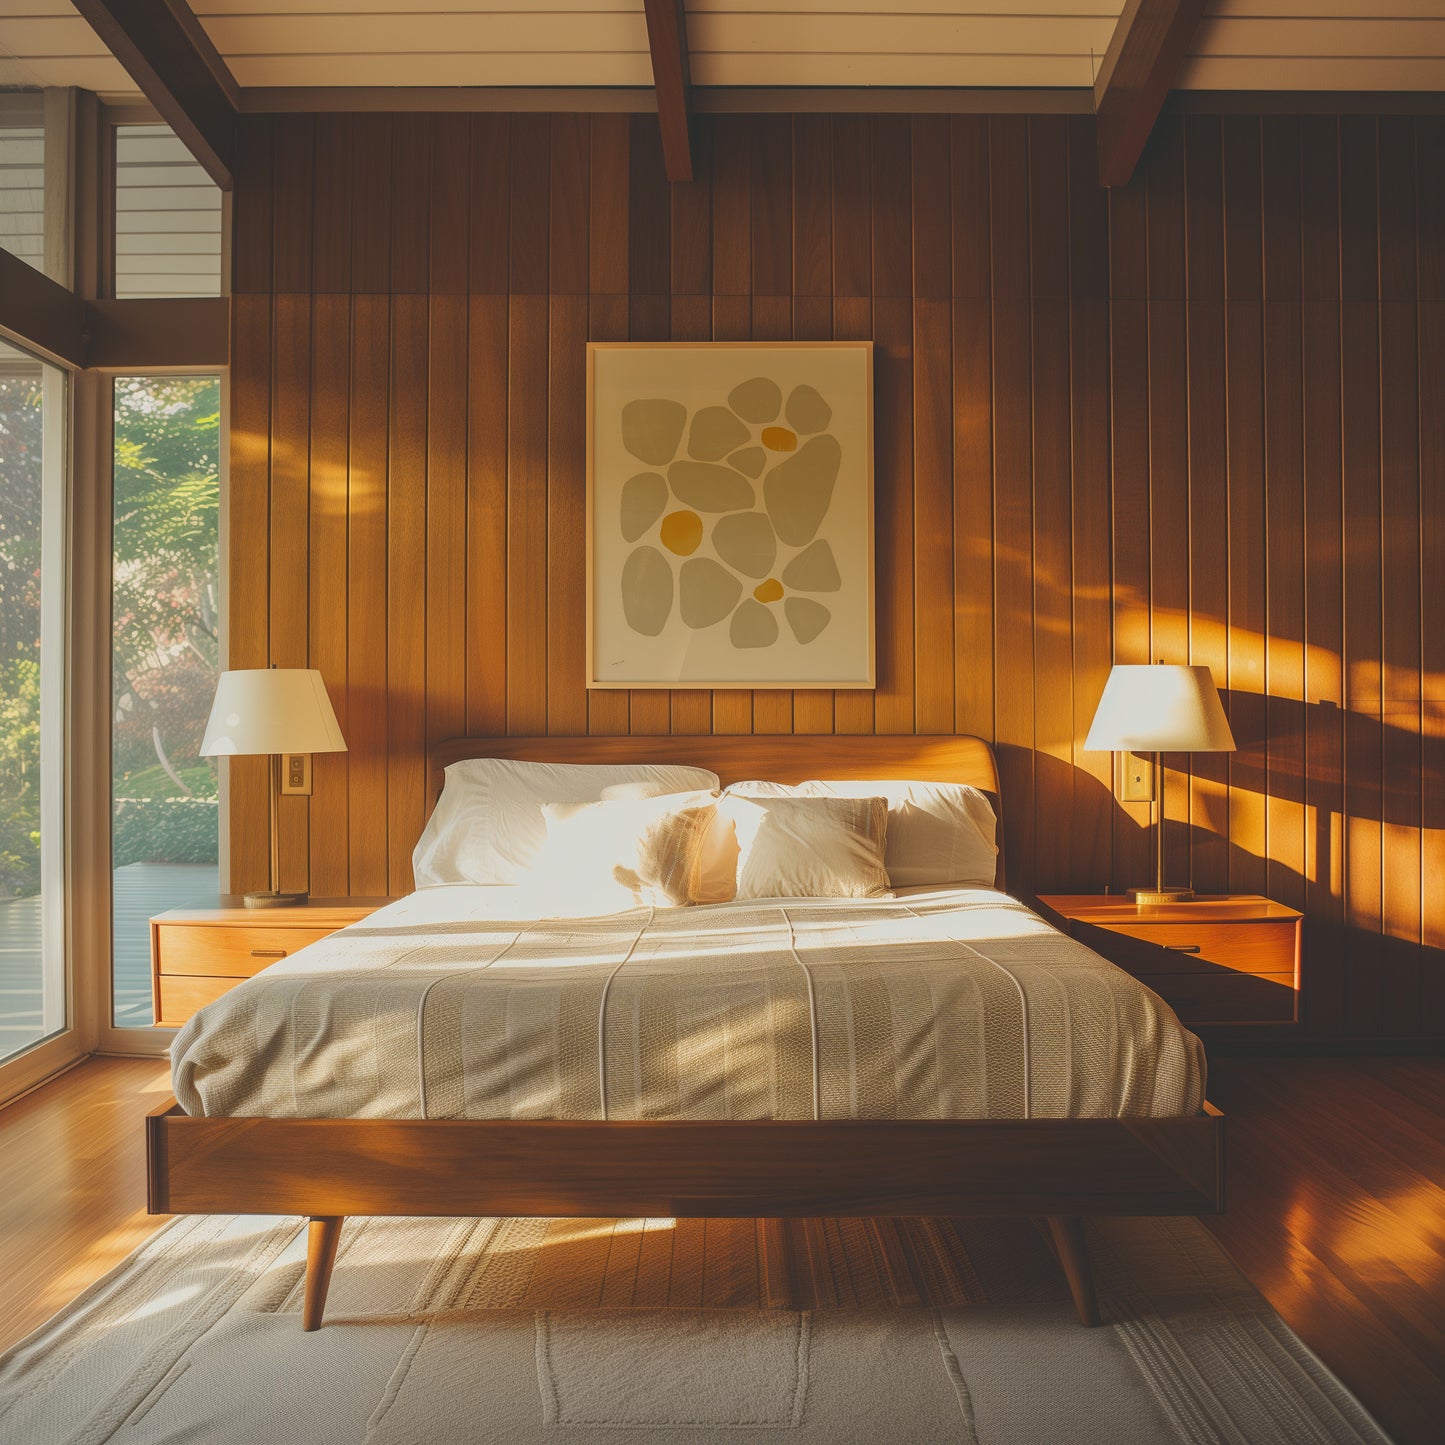 A cozy bedroom with warm lighting, wooden walls, and a neatly made bed.